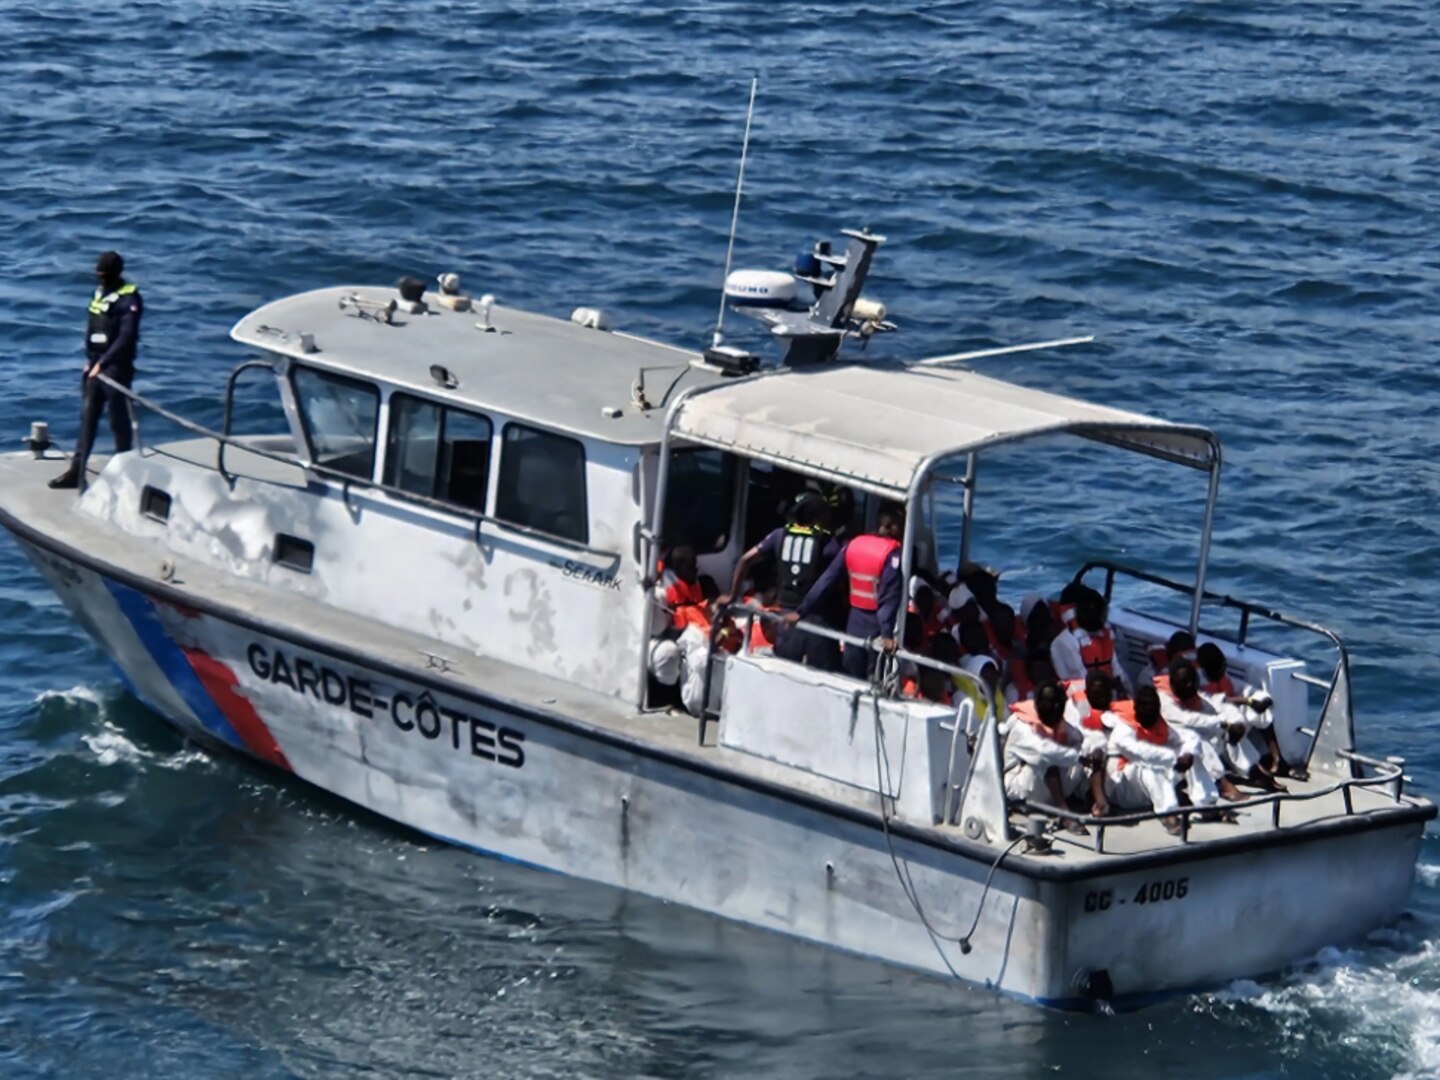 The crew of U.S. Coast Guard Cutter Venturous (WMEC 625) conducts a repatriation of 65 Haitian migrants to the Haitian coast guard, anchored in Cap-Haïtien, Haiti, March 12, 2024. Venturous patrolled the South Florida Straits and Windward Passage within the Coast Guard Seventh District’s area of responsibility to conduct maritime safety and security missions while working to detect, deter, and intercept unsafe and unlawful migrant ventures bound for the United States.